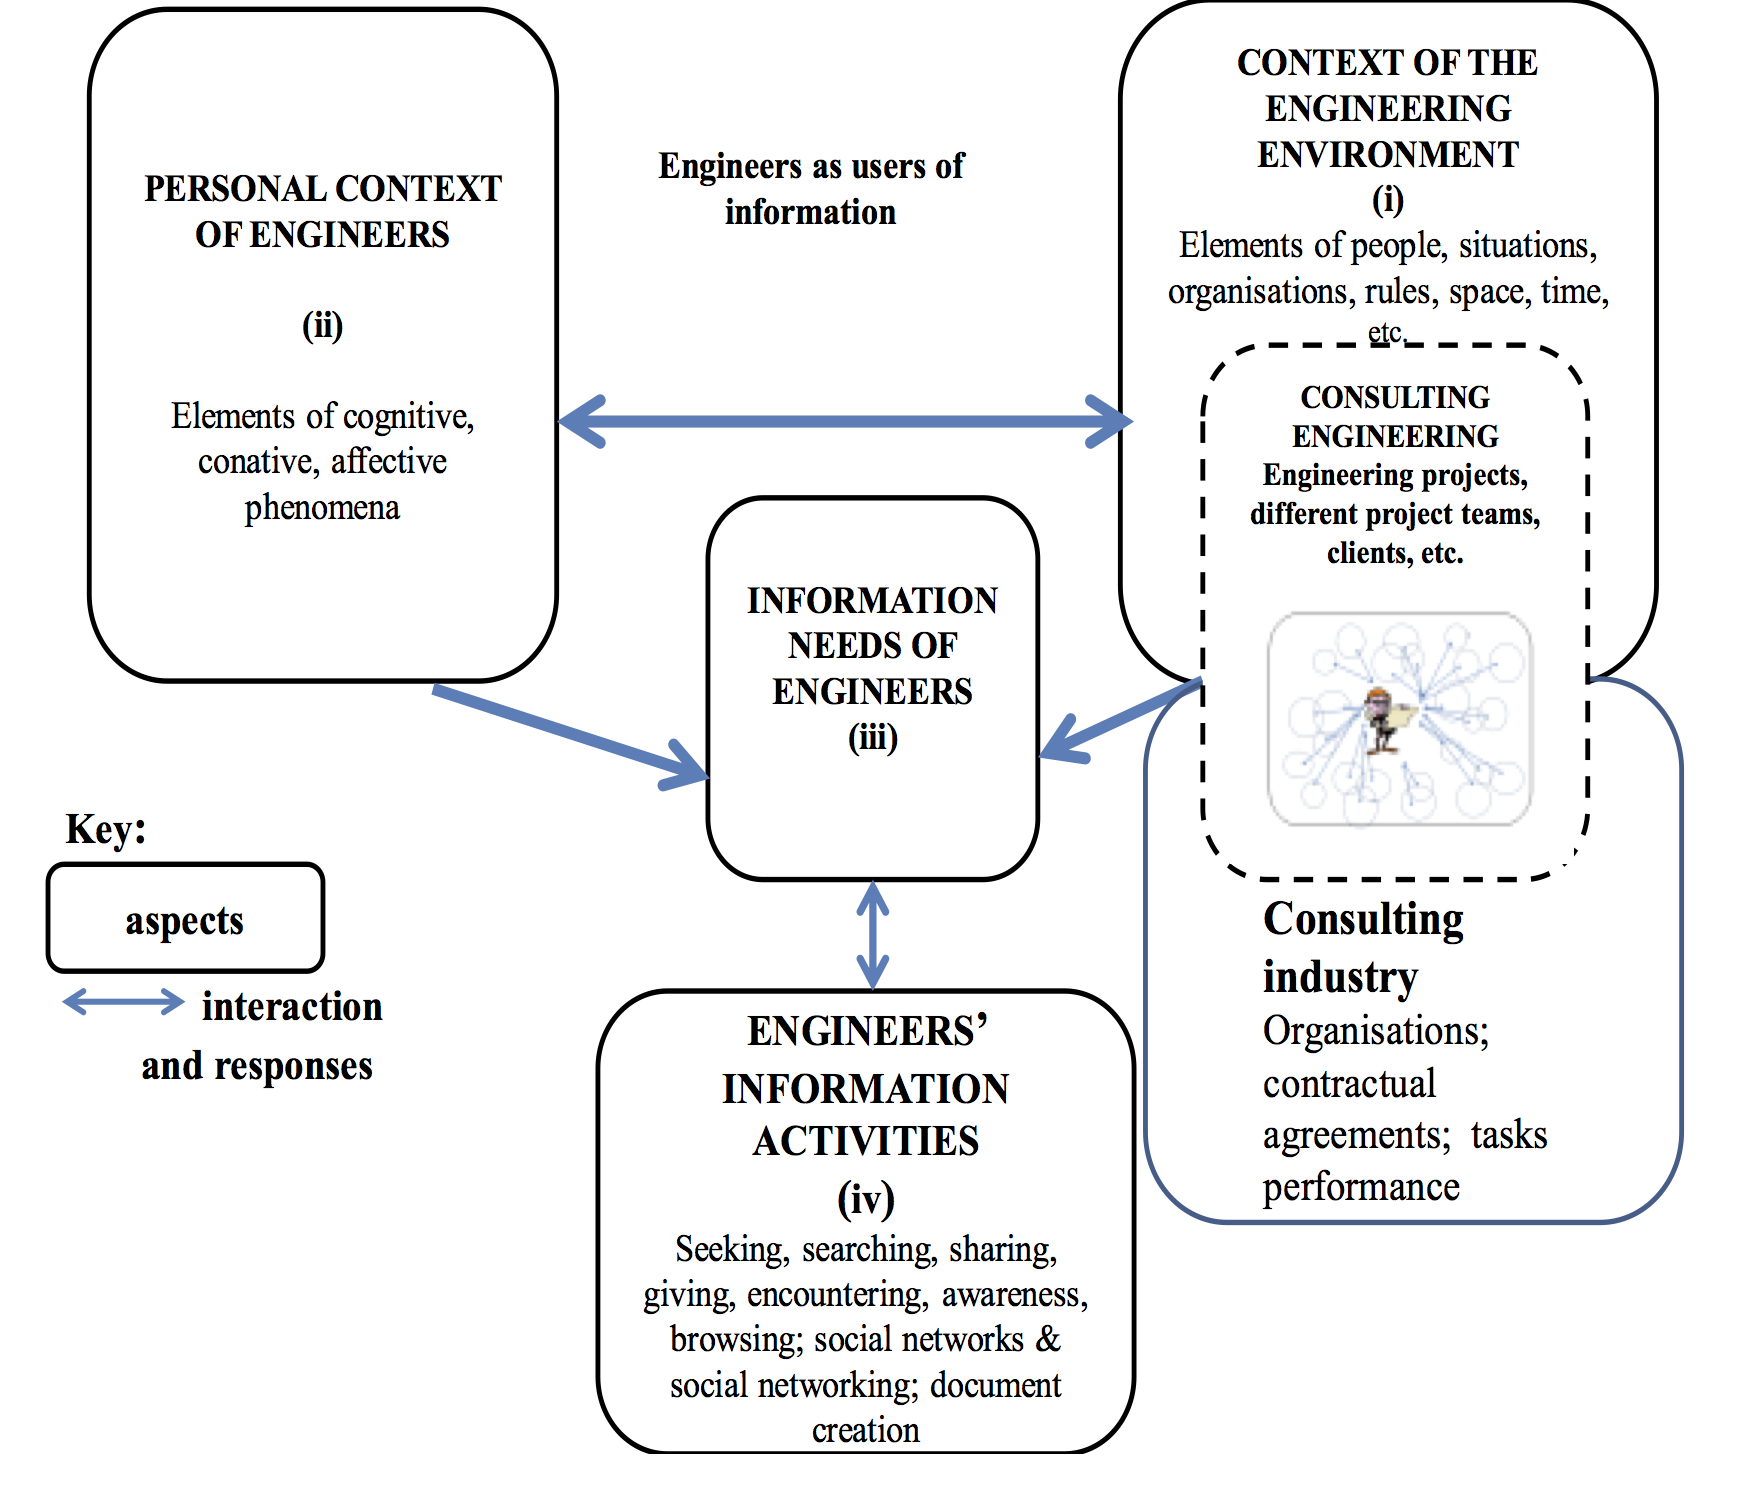 Framework of consulting engineers’ collaborative information behaviour